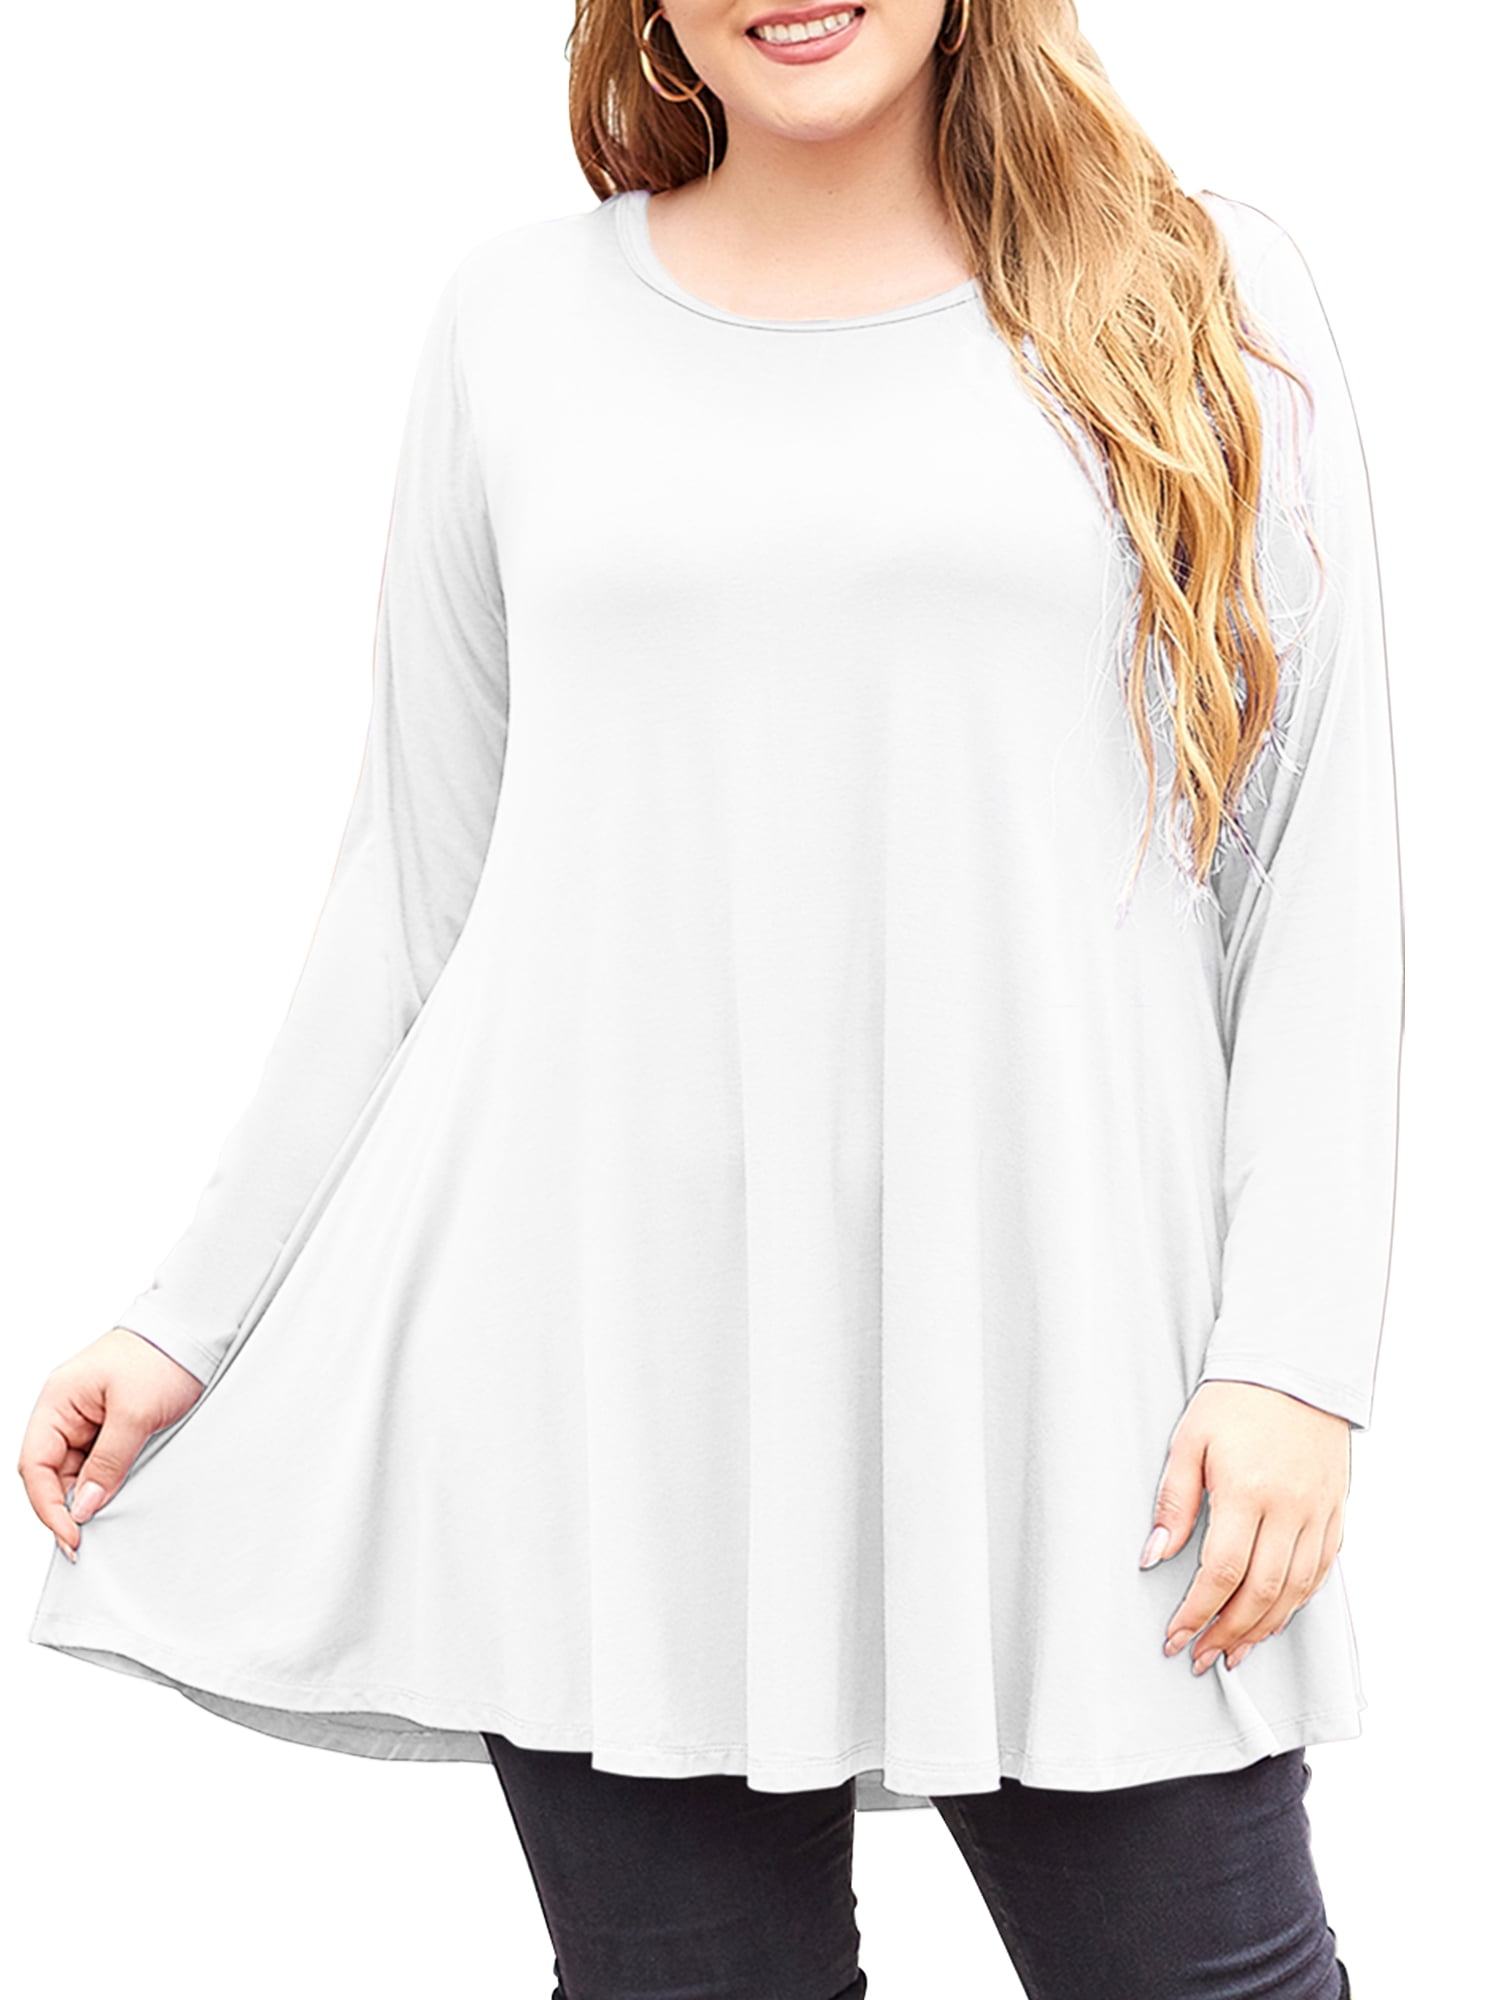 BELAROI Plus Size Tops for Women 3/4 Sleeve Comfy Tunic for Leggings Loose  Casual T-Shirt(1X, Deep Gray) at  Women's Clothing store